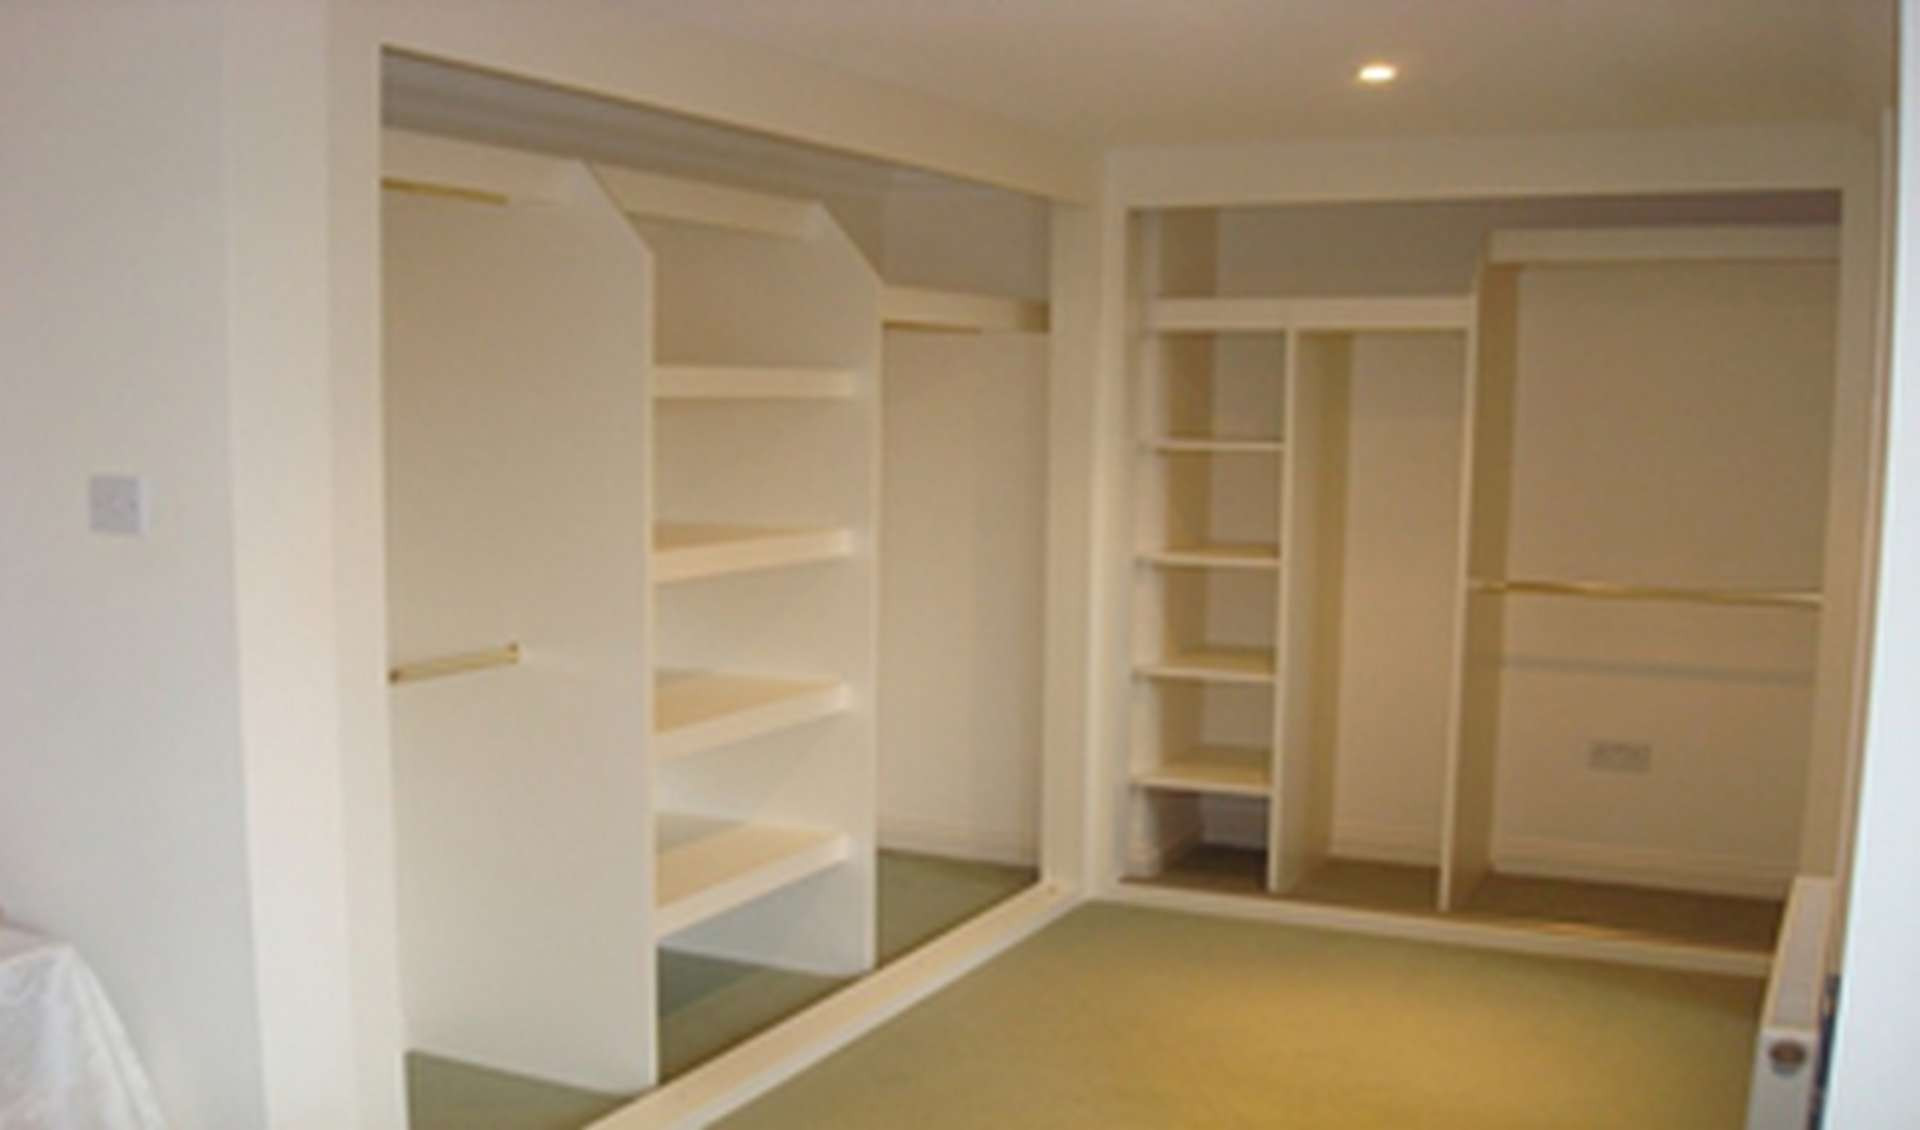 Built In Bedroom Storage
 Fitted storage solutions